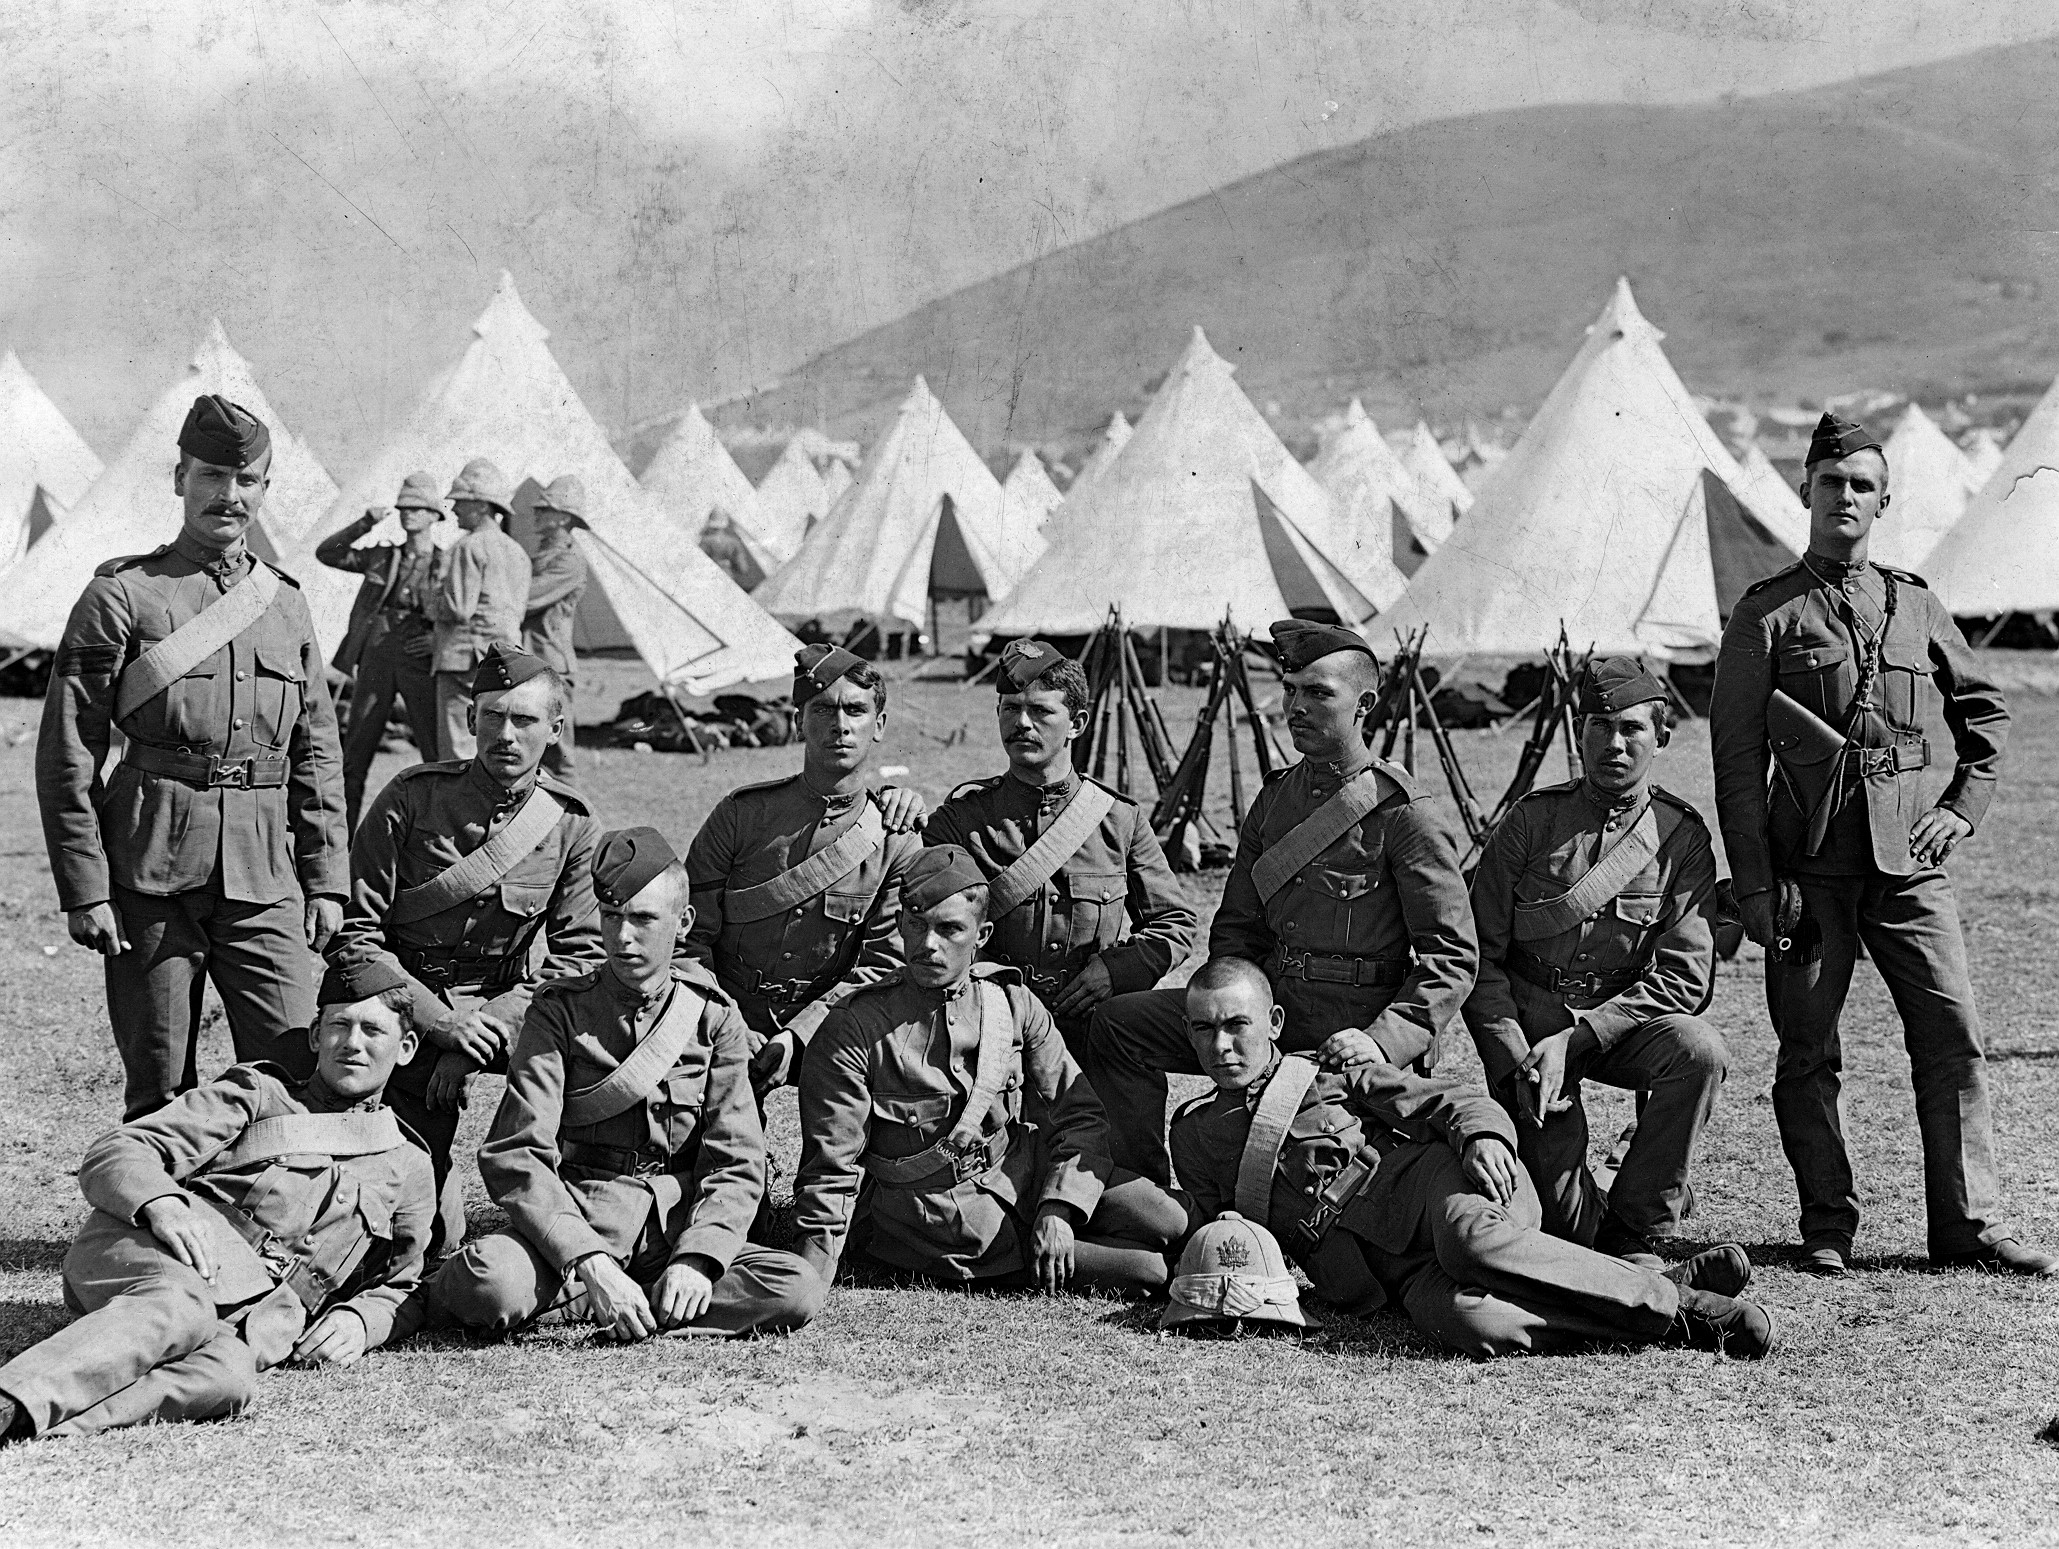 Eleven of the 20 members of the 21st Battalion Essex Fusiliers who joined the Royal Canadian Regiment in South Africa during the Boar War in 1899-1900.